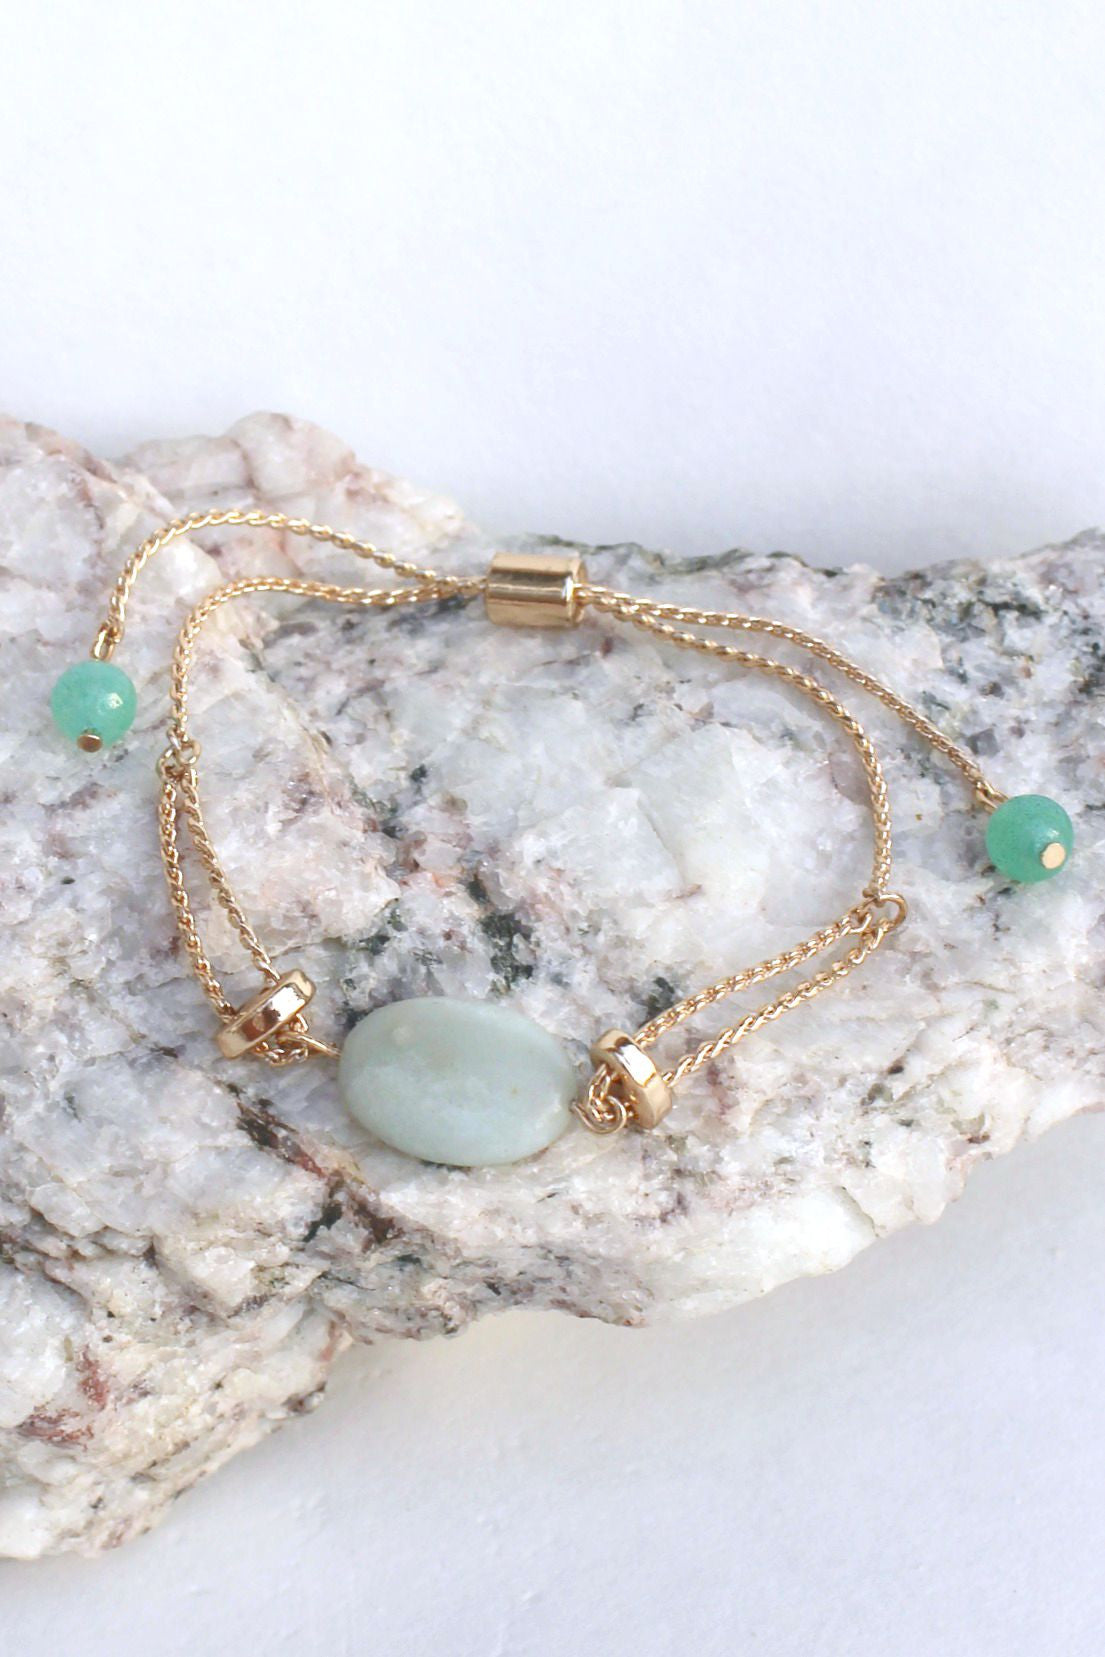 Oval Stone and Chain Bracelet, Green